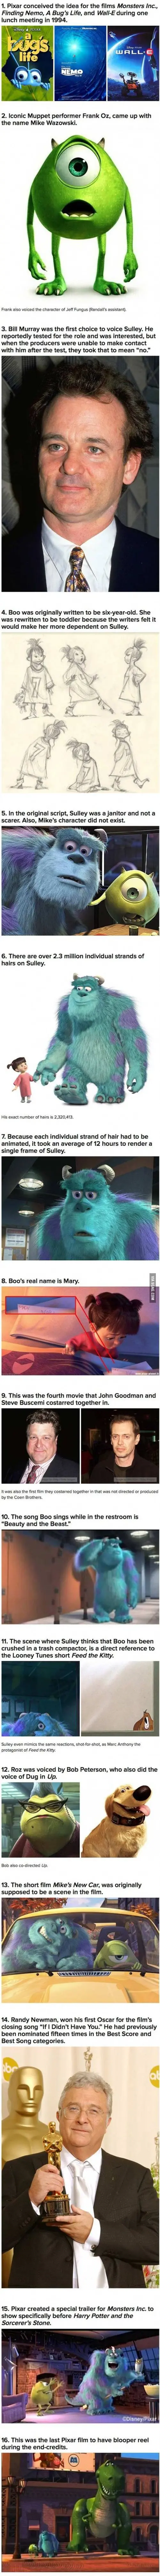 Monsters Inc Facts